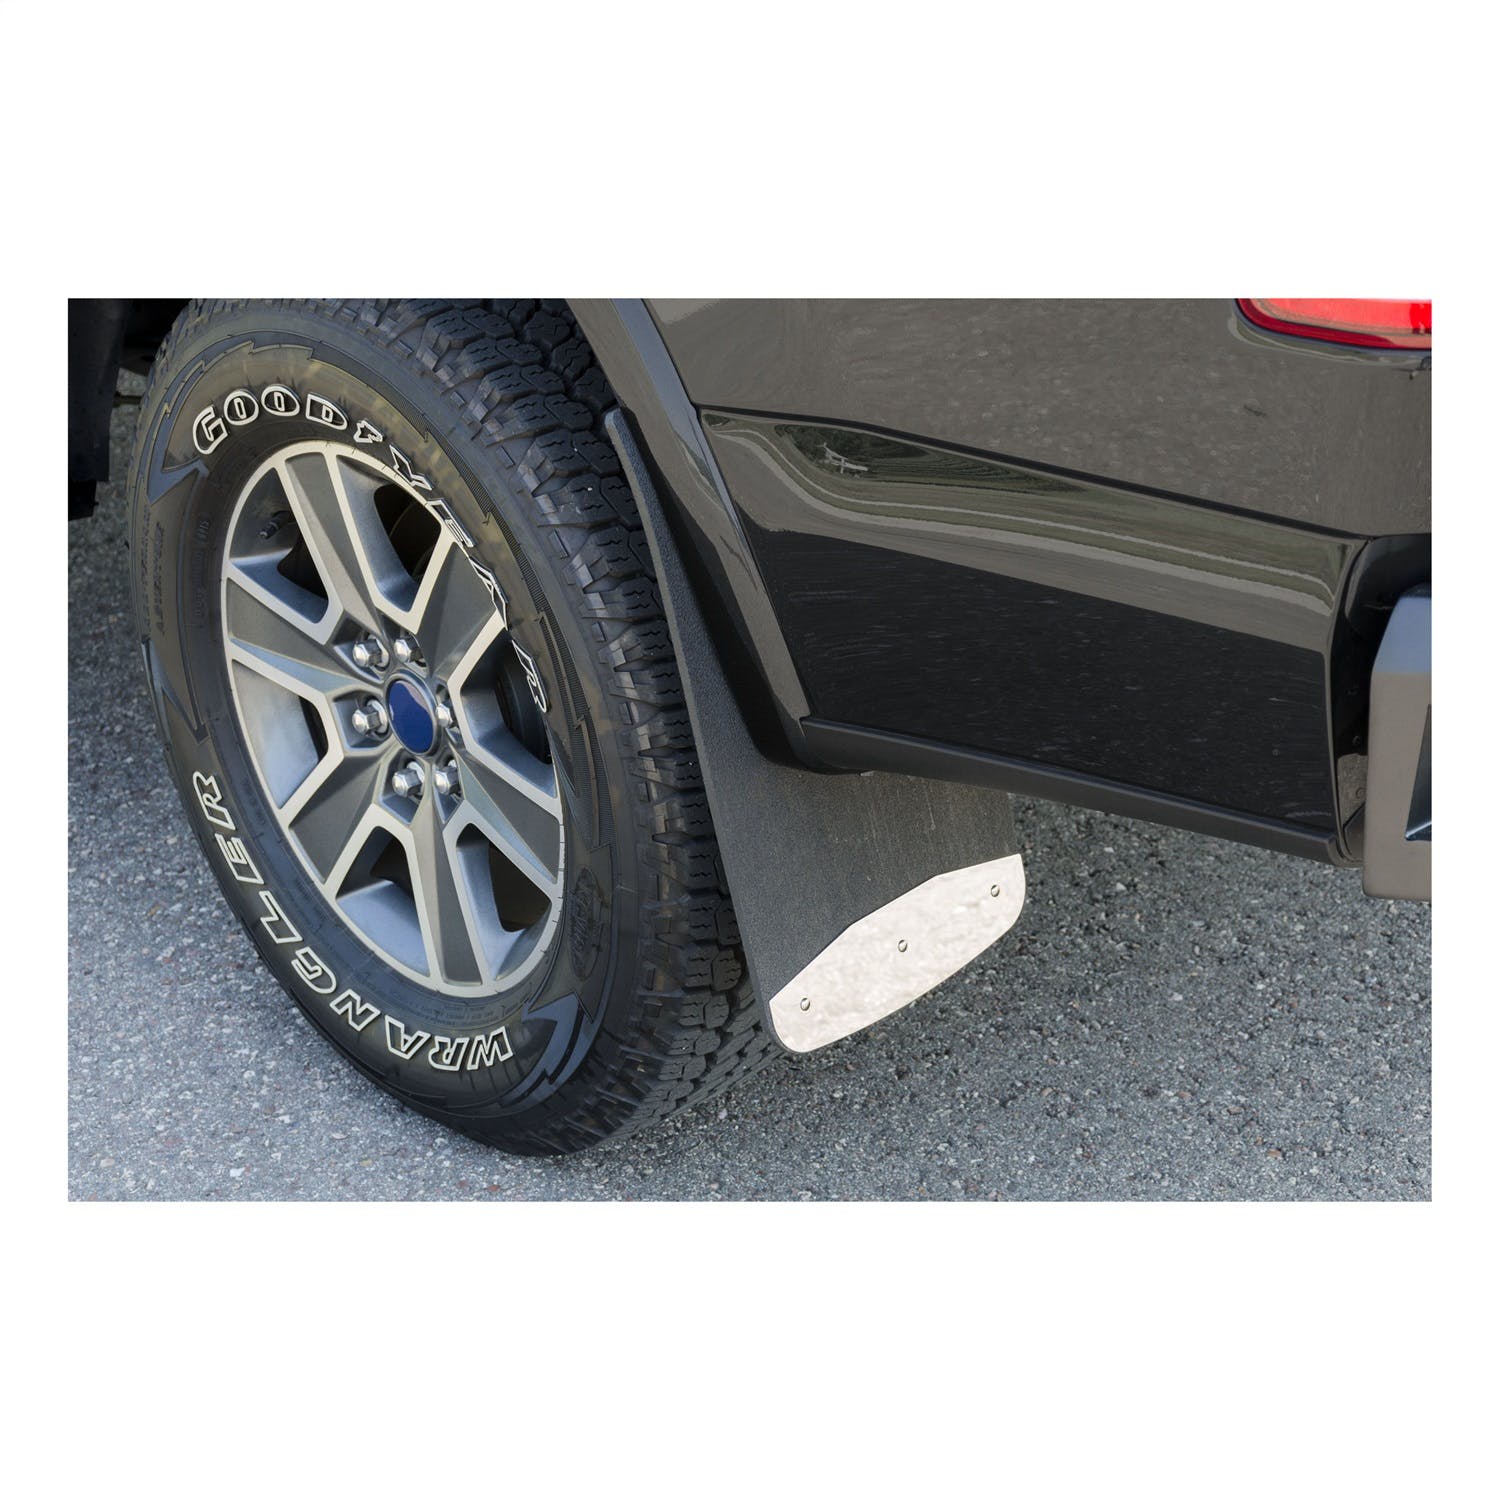 LUVERNE 251723 Textured Rubber Mud Guards